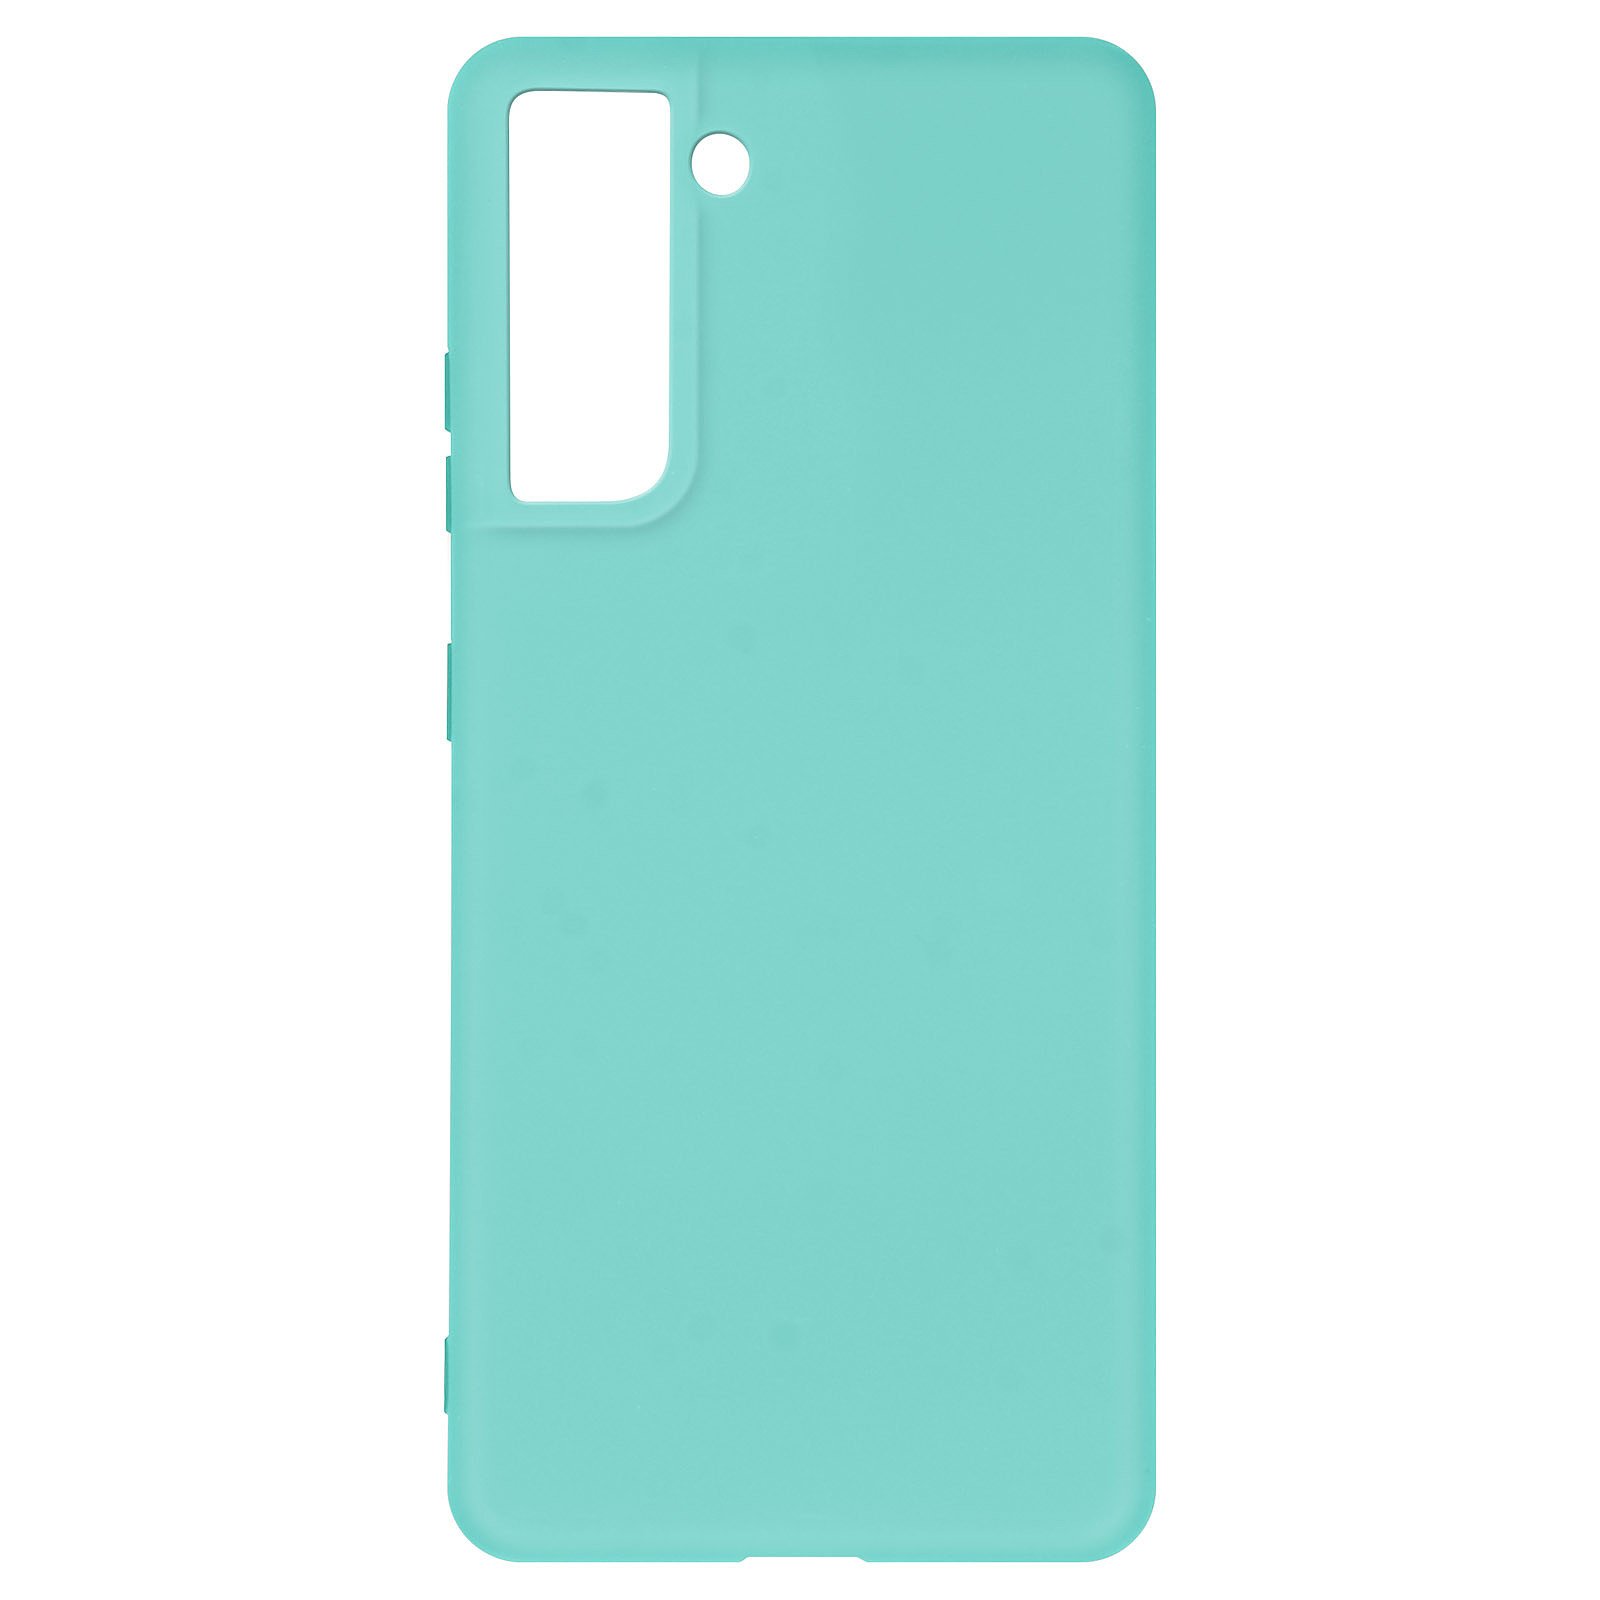 Avizar Coque pour Samsung Galaxy S21 Plus Silicone Souple Finition Soft Touch Compatible QI Turquoise - Coque telephone Avizar